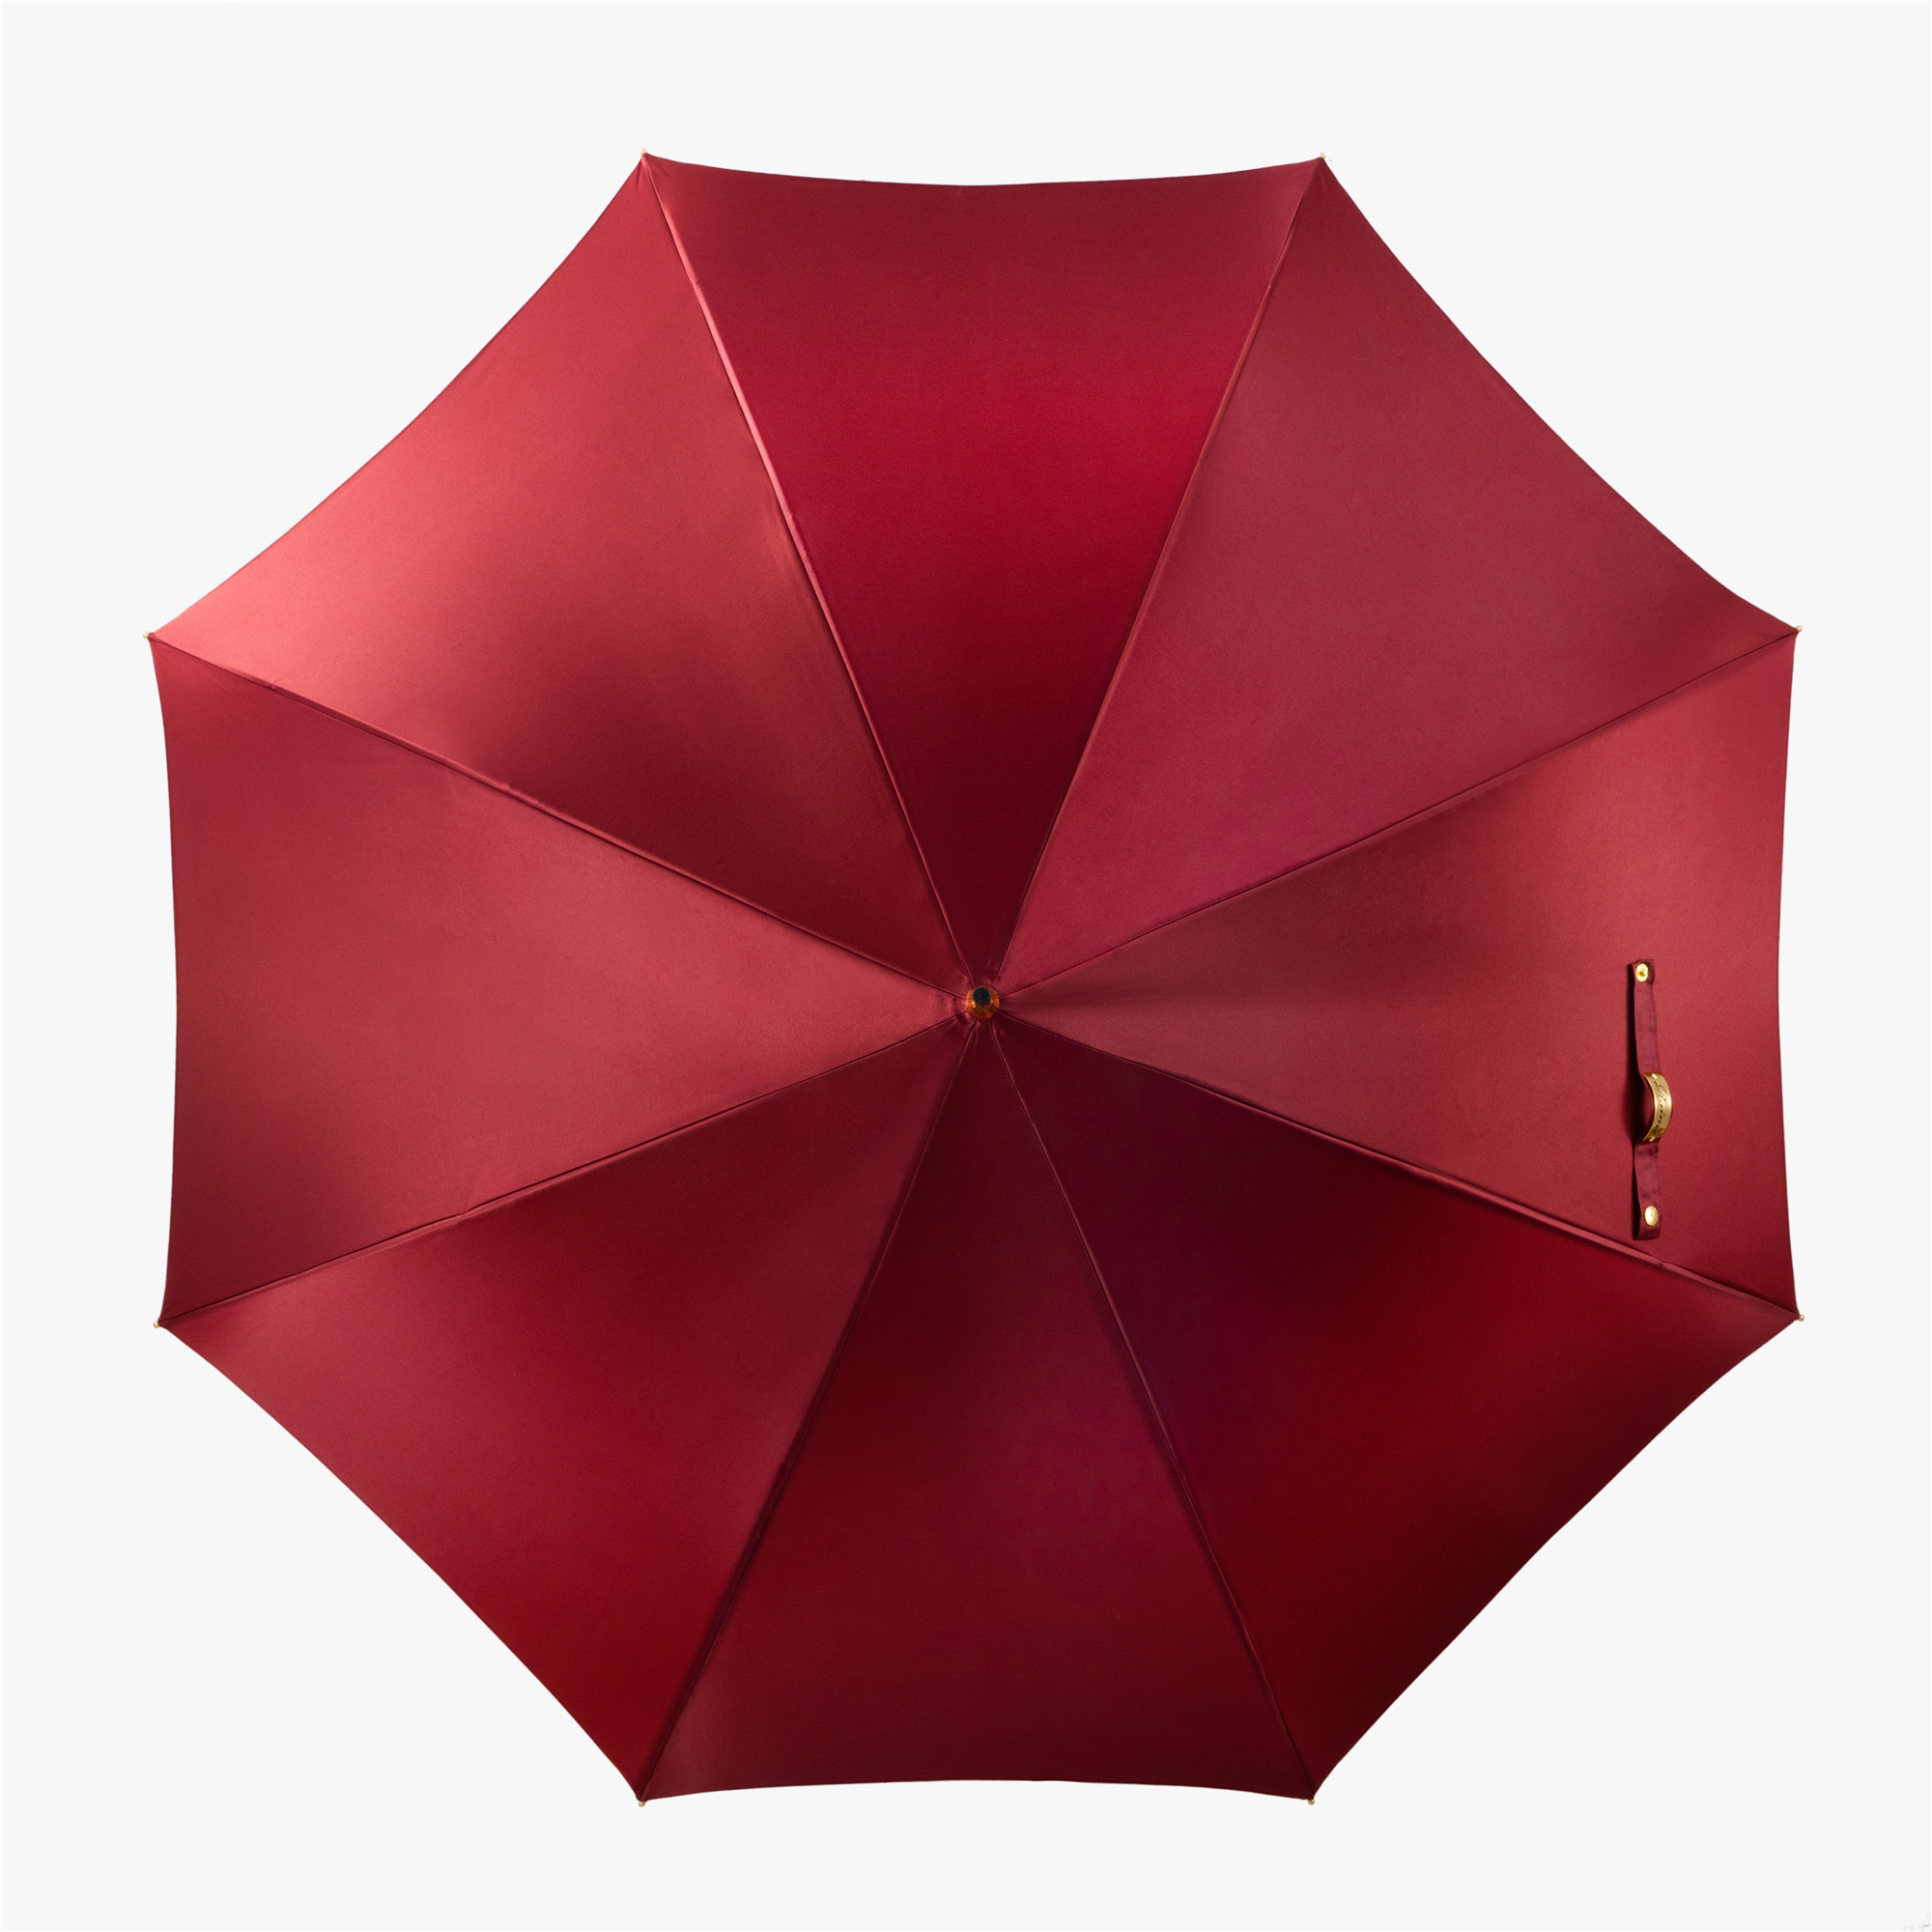 Solid wood umbrella with straight handle